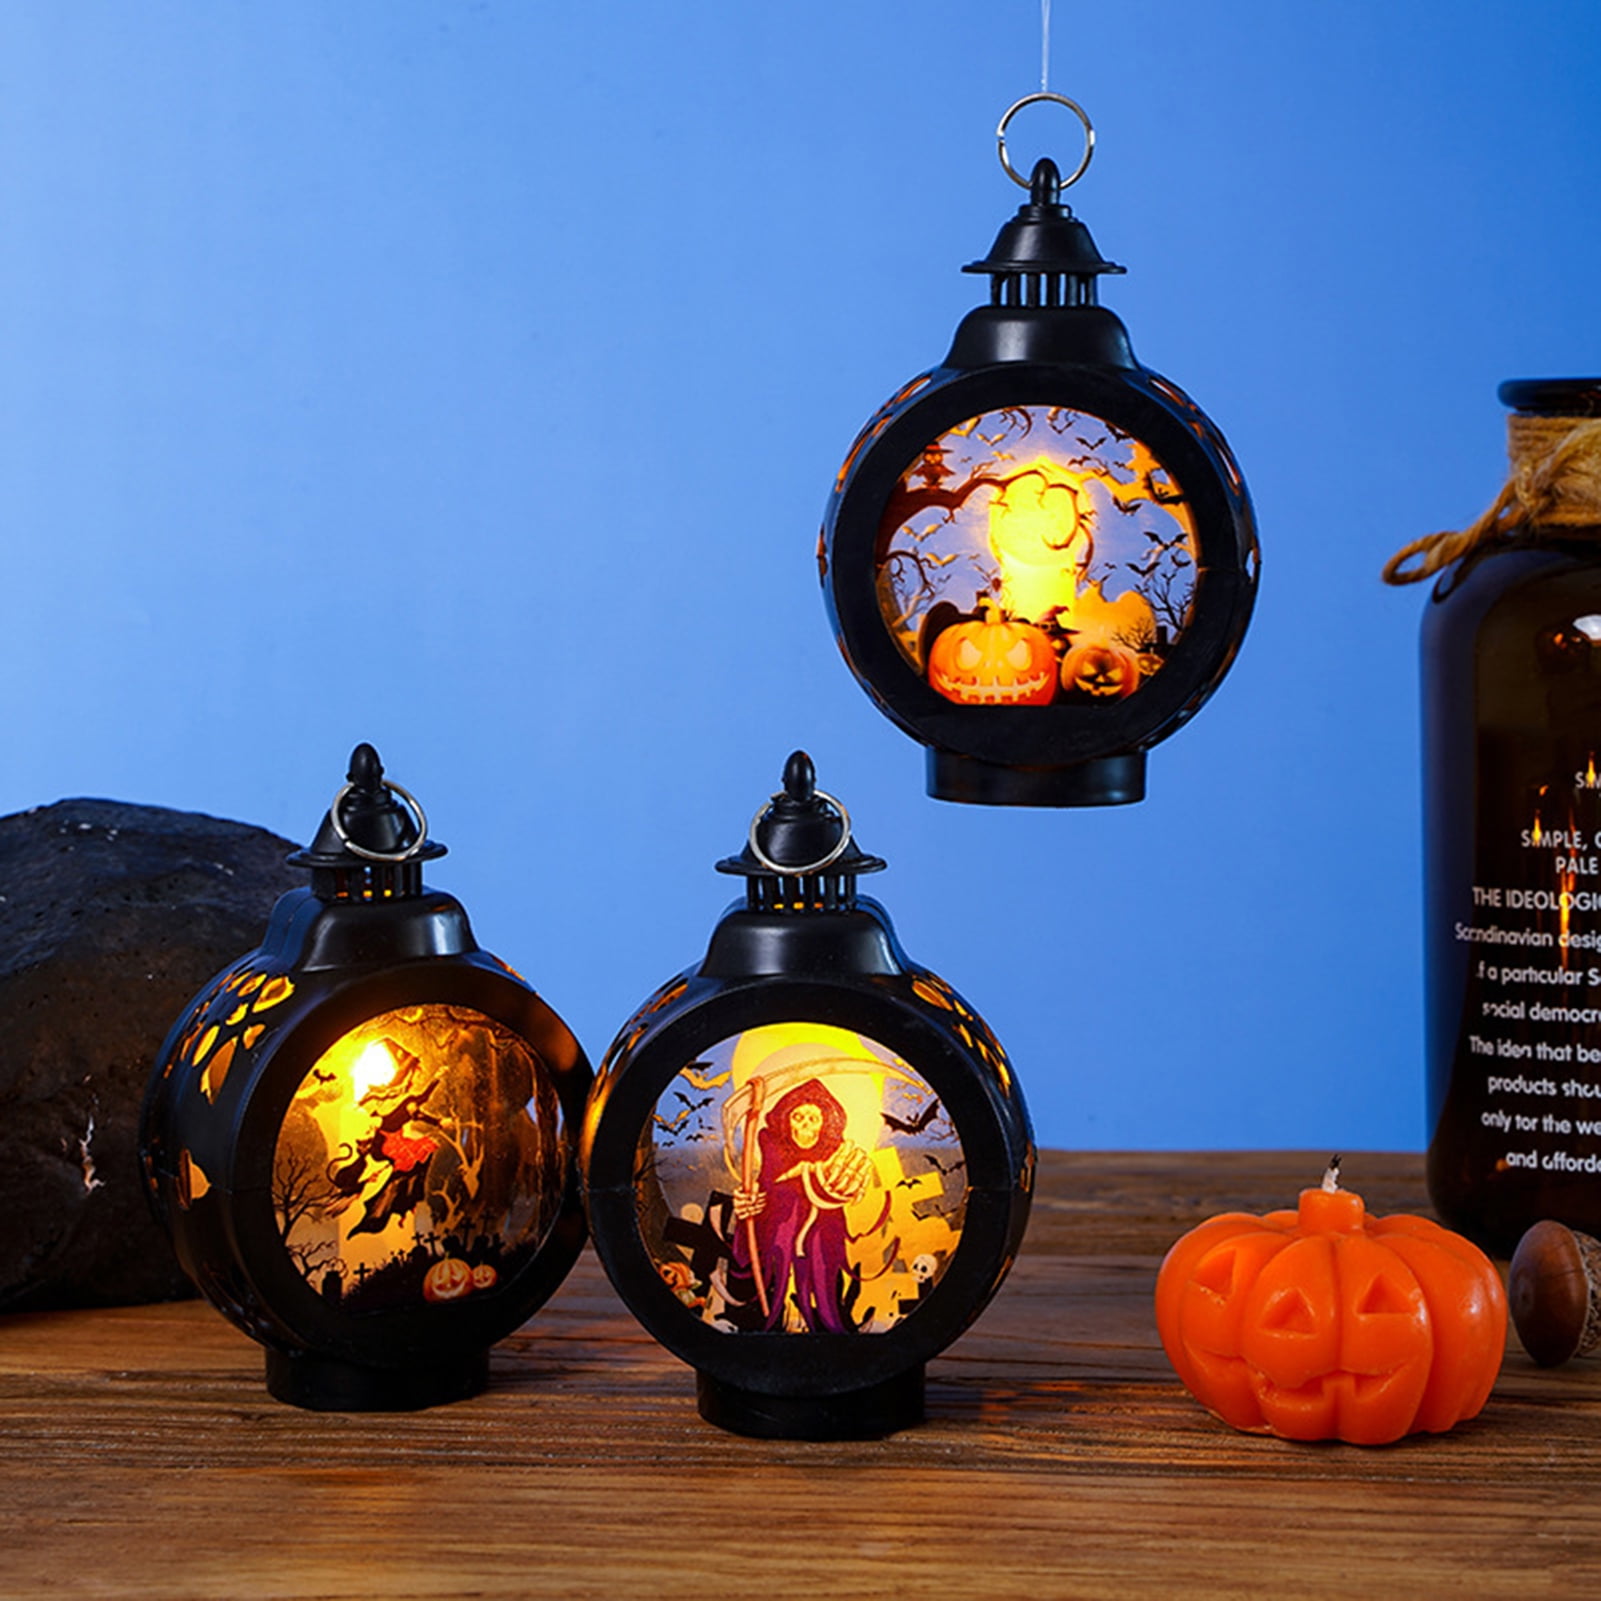 LLQ 8 Pcs Mini Lantern with Flickering LED Tea Light, Battery Included,  Vintage Brown Lanterns Decorative, Hanging Candle Lanterns for Halloween